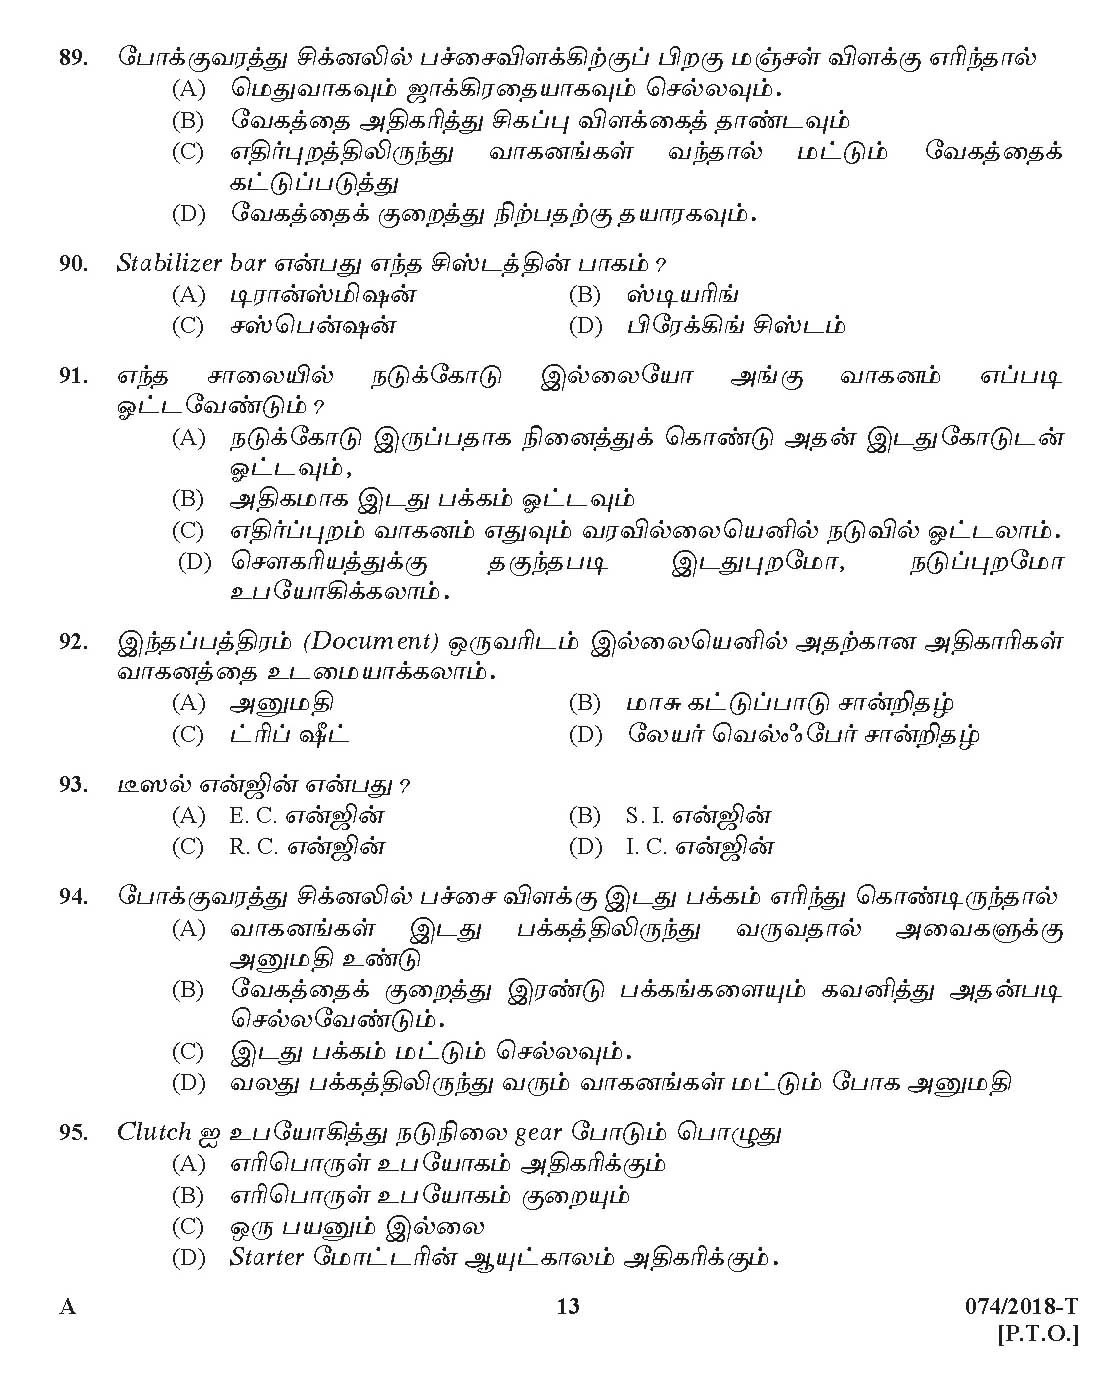 Kerala PSC Police Constable Driver Exam 2018 Question Paper Code 0742018 T 12